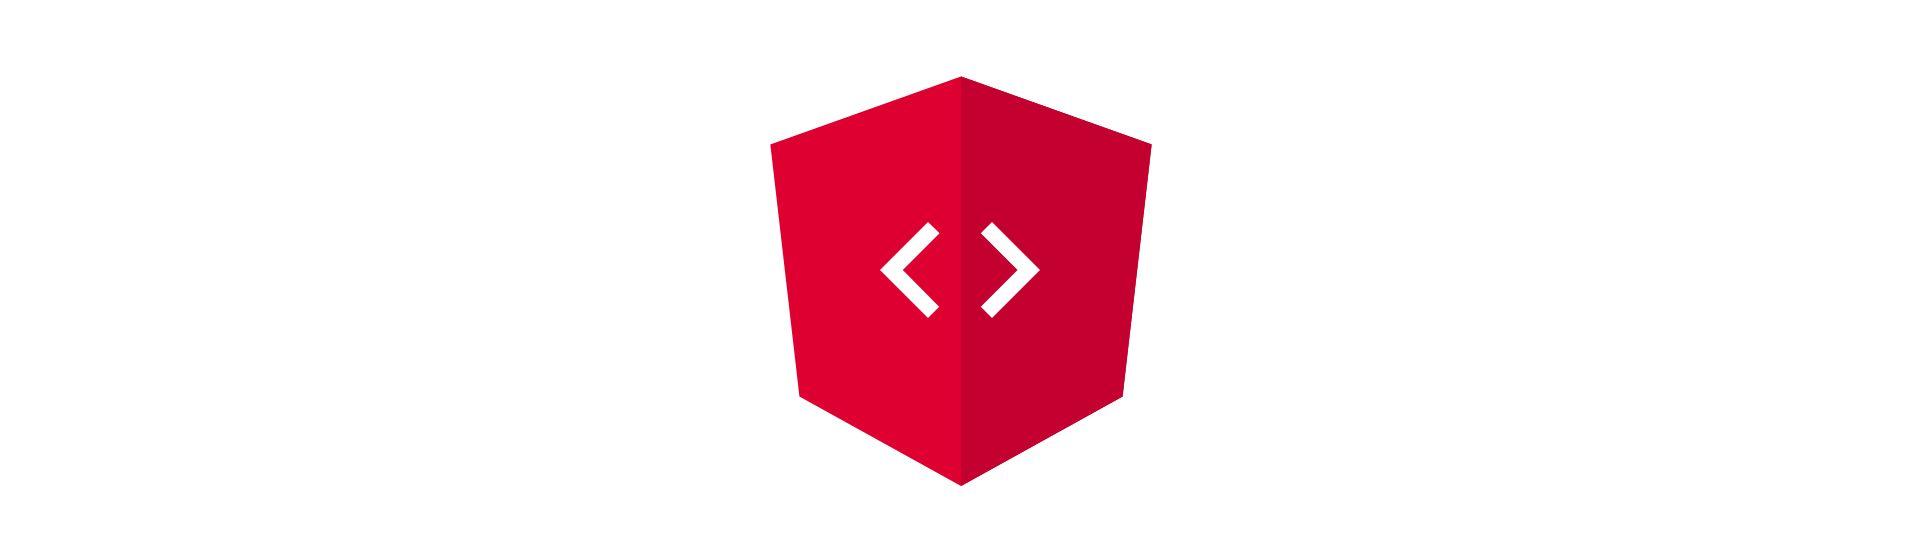 Red Angular Logo - Angular: What you should have read in 2017